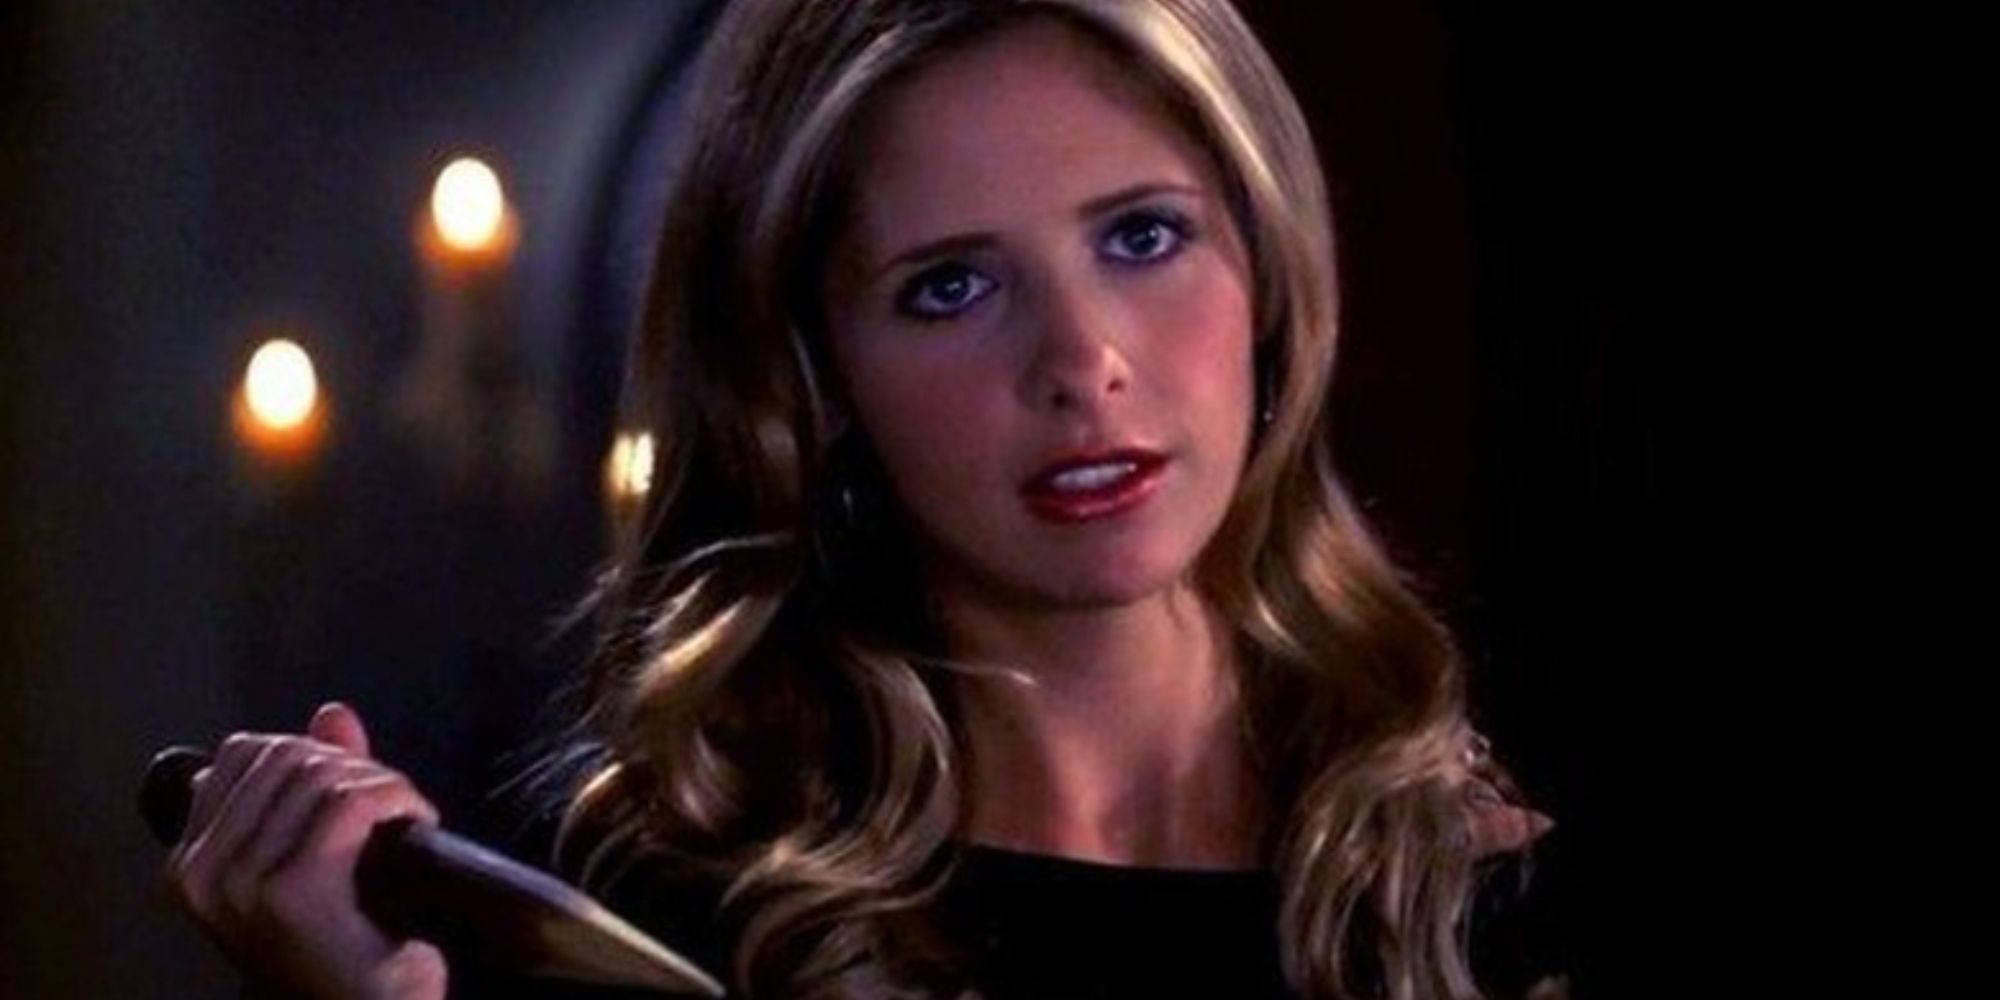 Buffy Summers in Buffy the Vampire Slayer